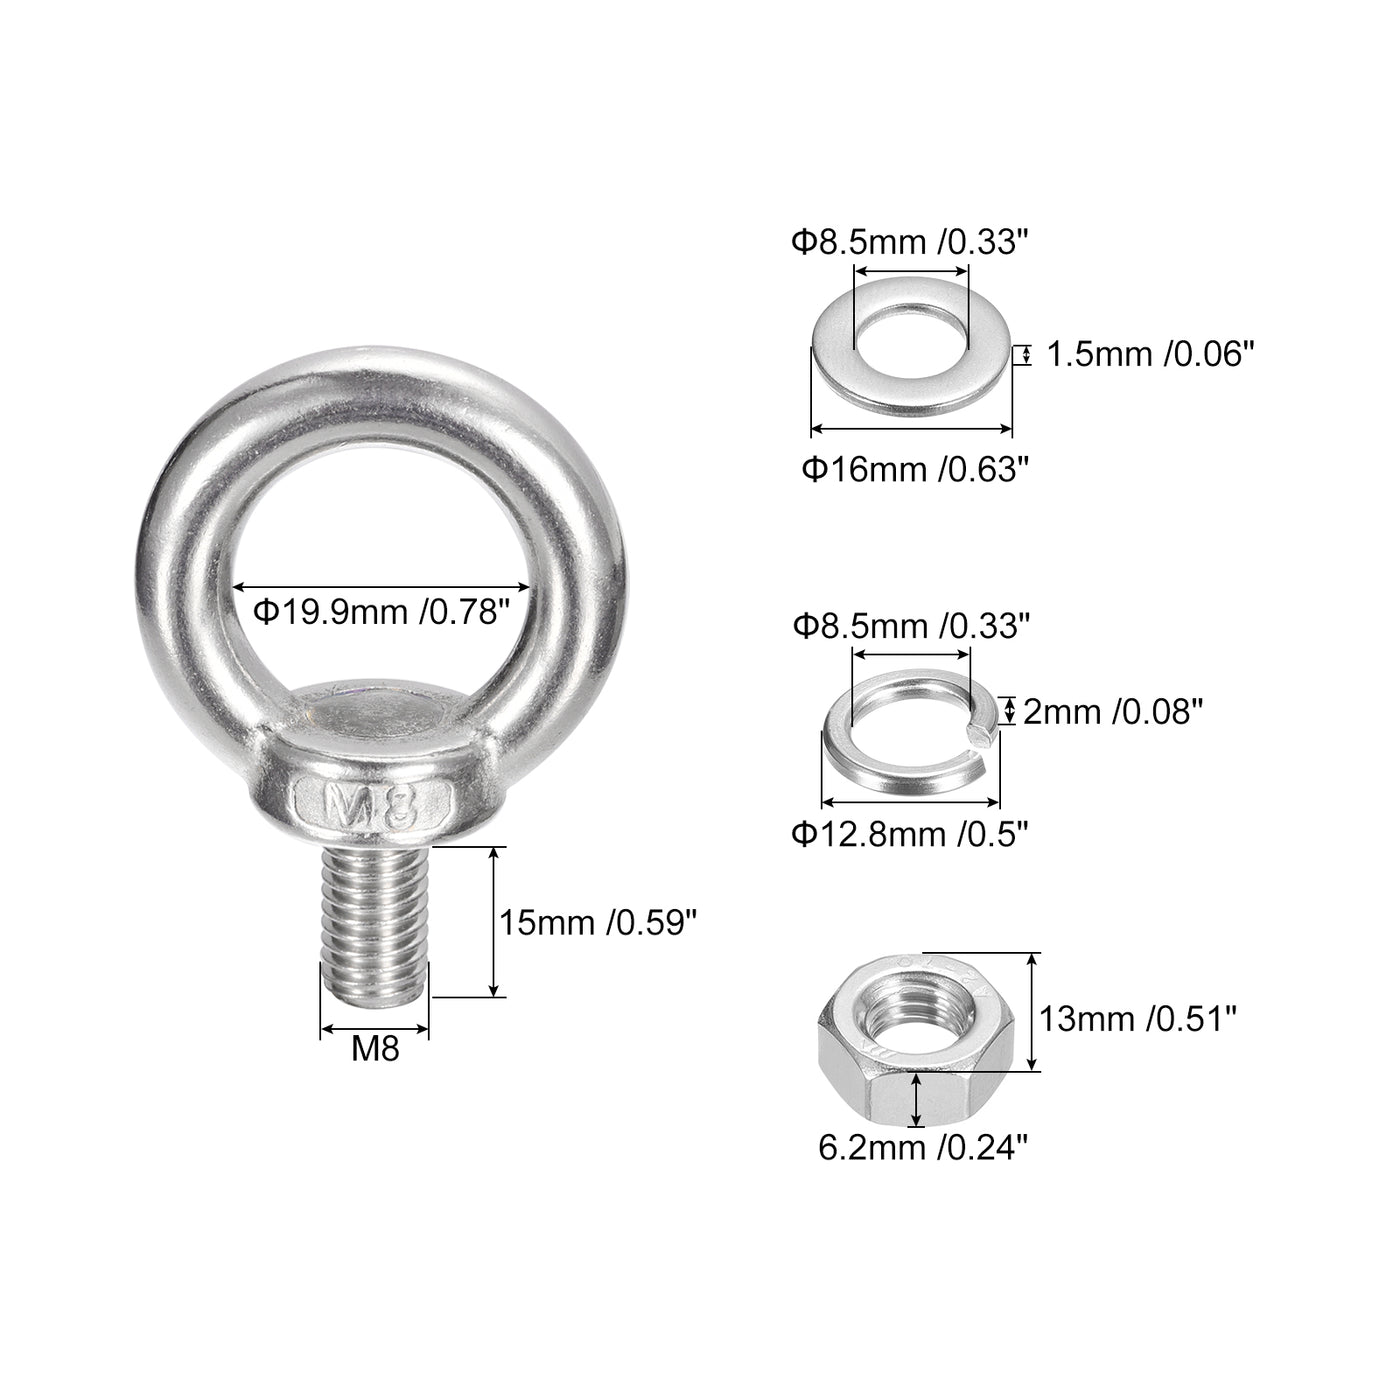 uxcell Uxcell Lifting Eye Bolt, 2 Sets M8x15mm Eye Bolt with Nut Washer 304 Stainless Steel